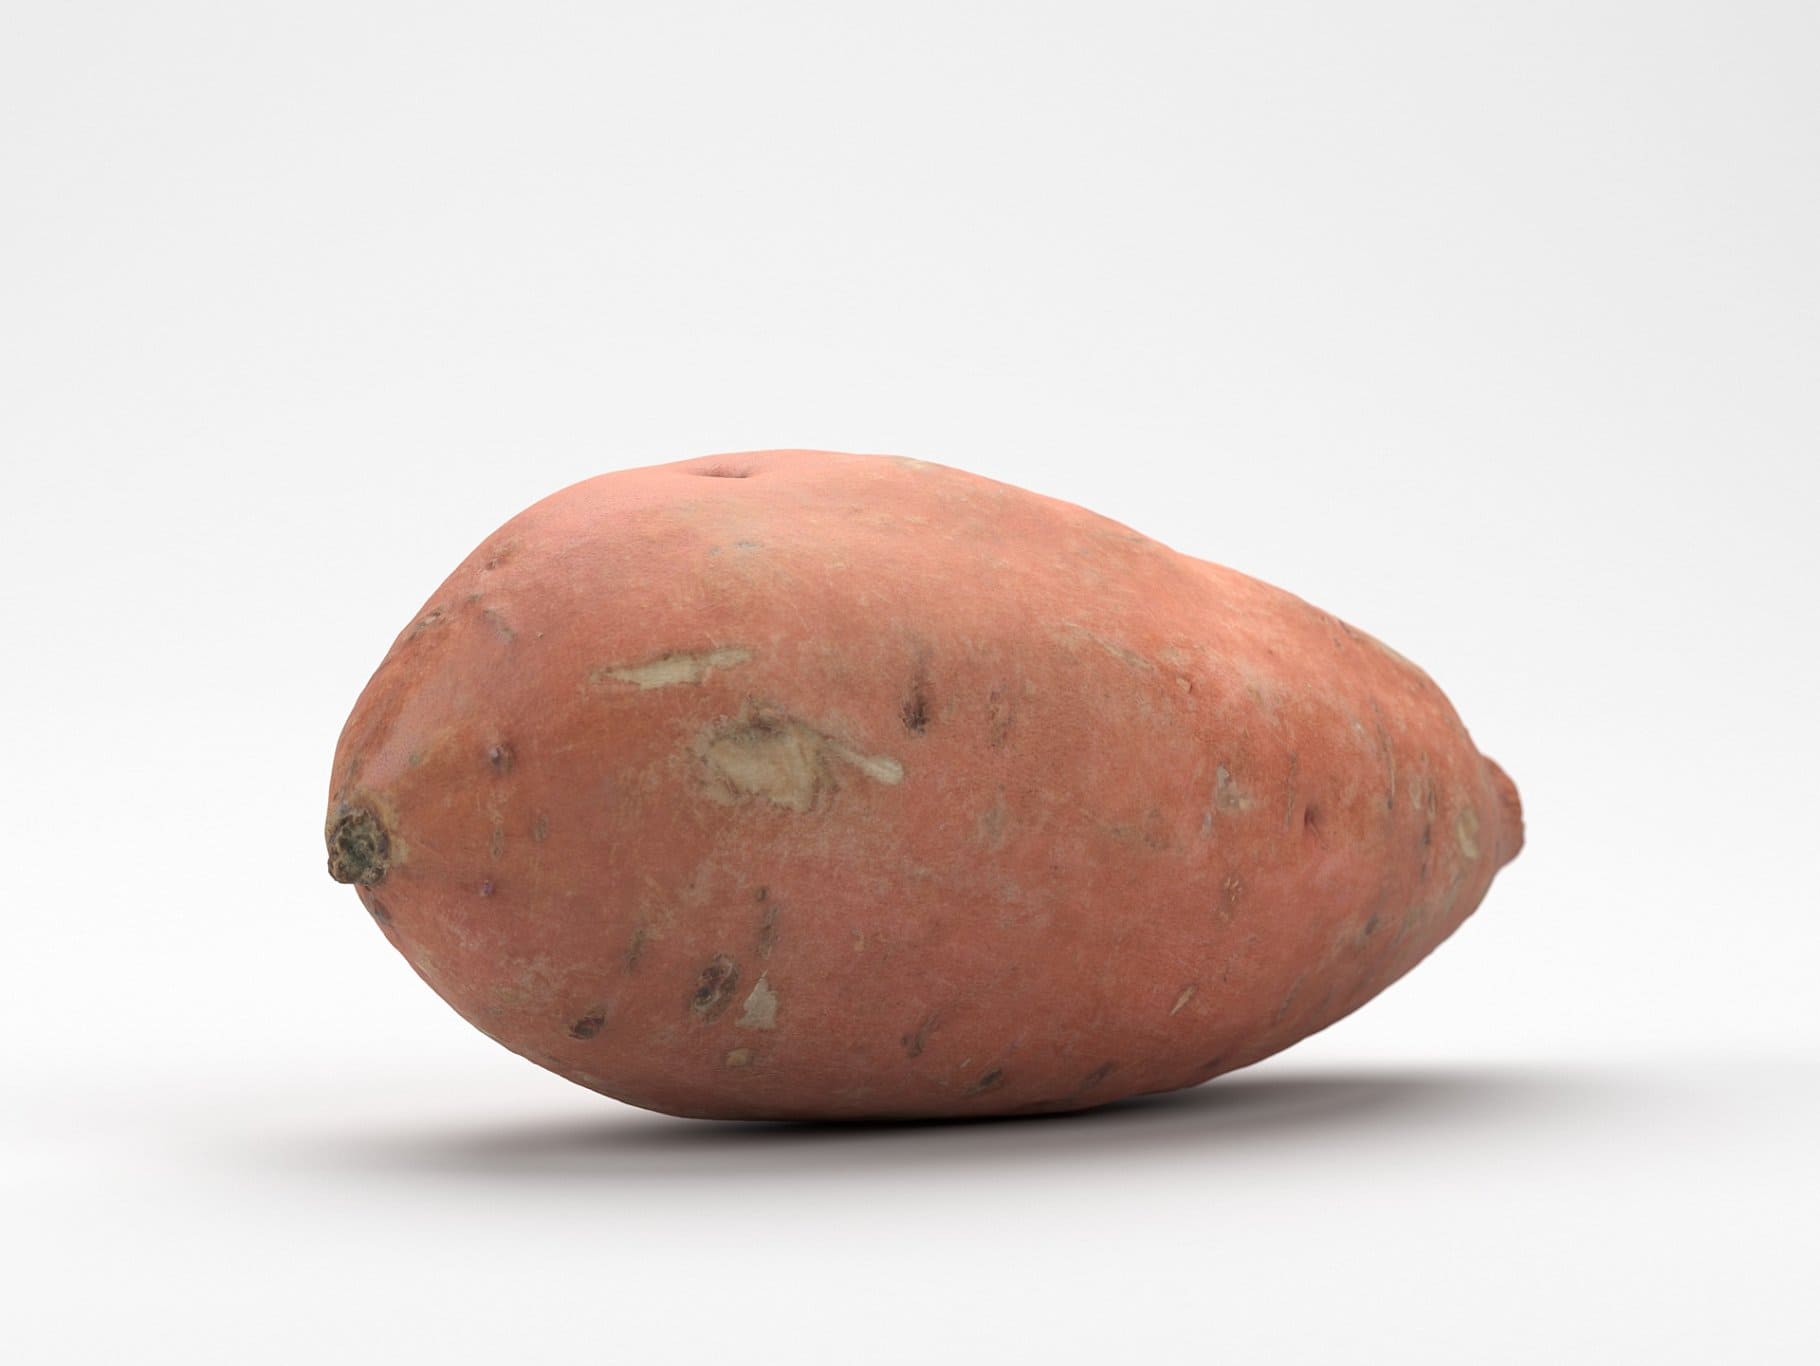 Highly detailed, photorealistic 3d scanned model of a sweet potato.